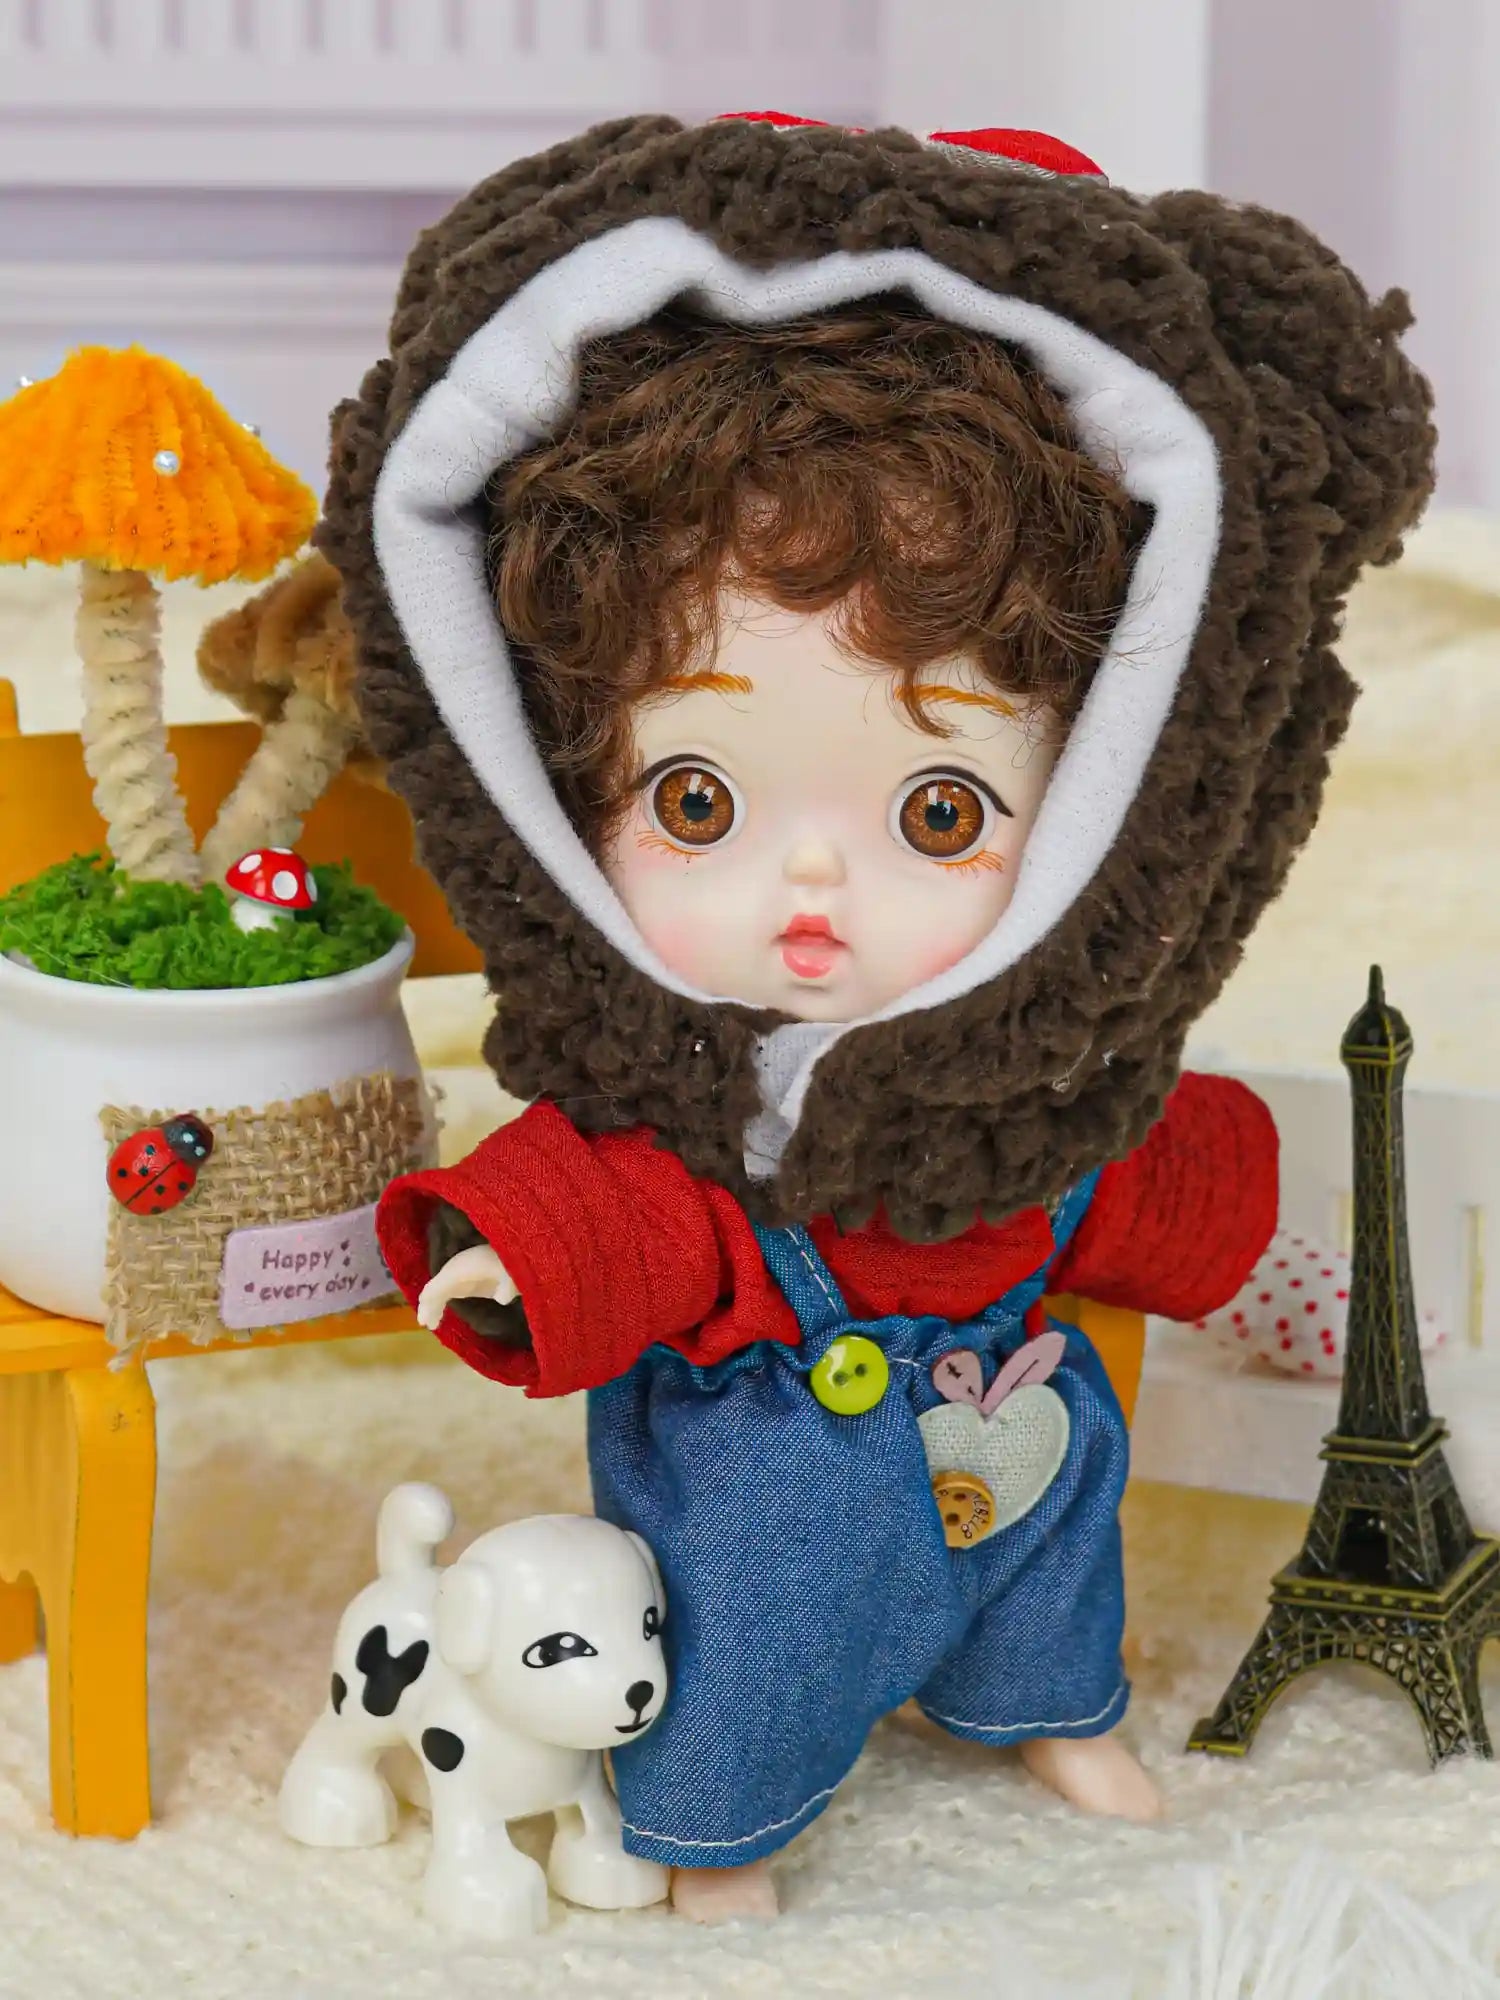 A delightful doll with a whimsical bear hat and denim overalls, accompanied by a little Eiffel Tower and a toy dog.